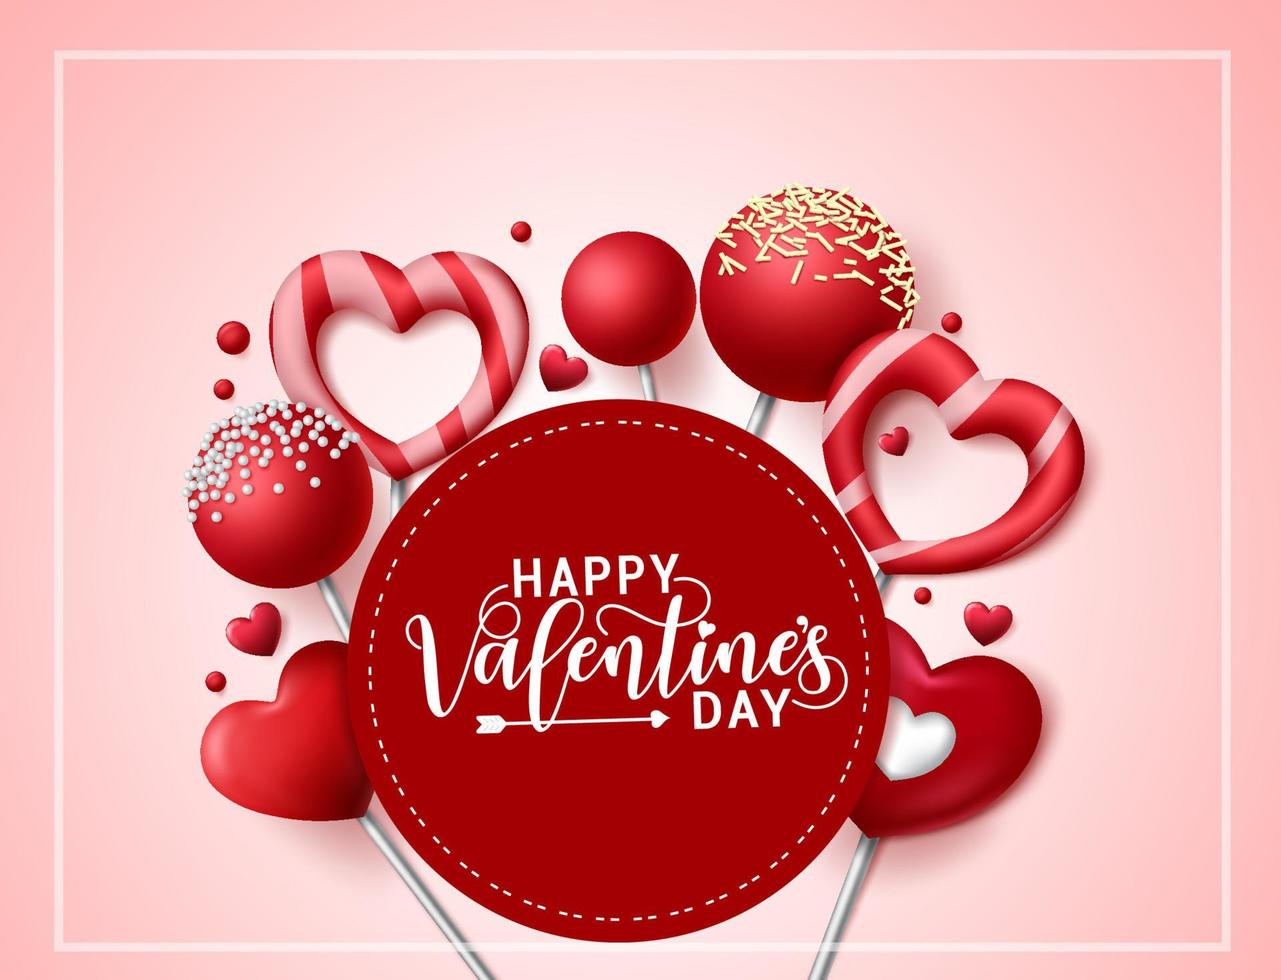 Valentines greeting card vector  template. Happy valentines day greeting text in circle frame with empty space for messages and valentine candy and lollipop elements in red background.